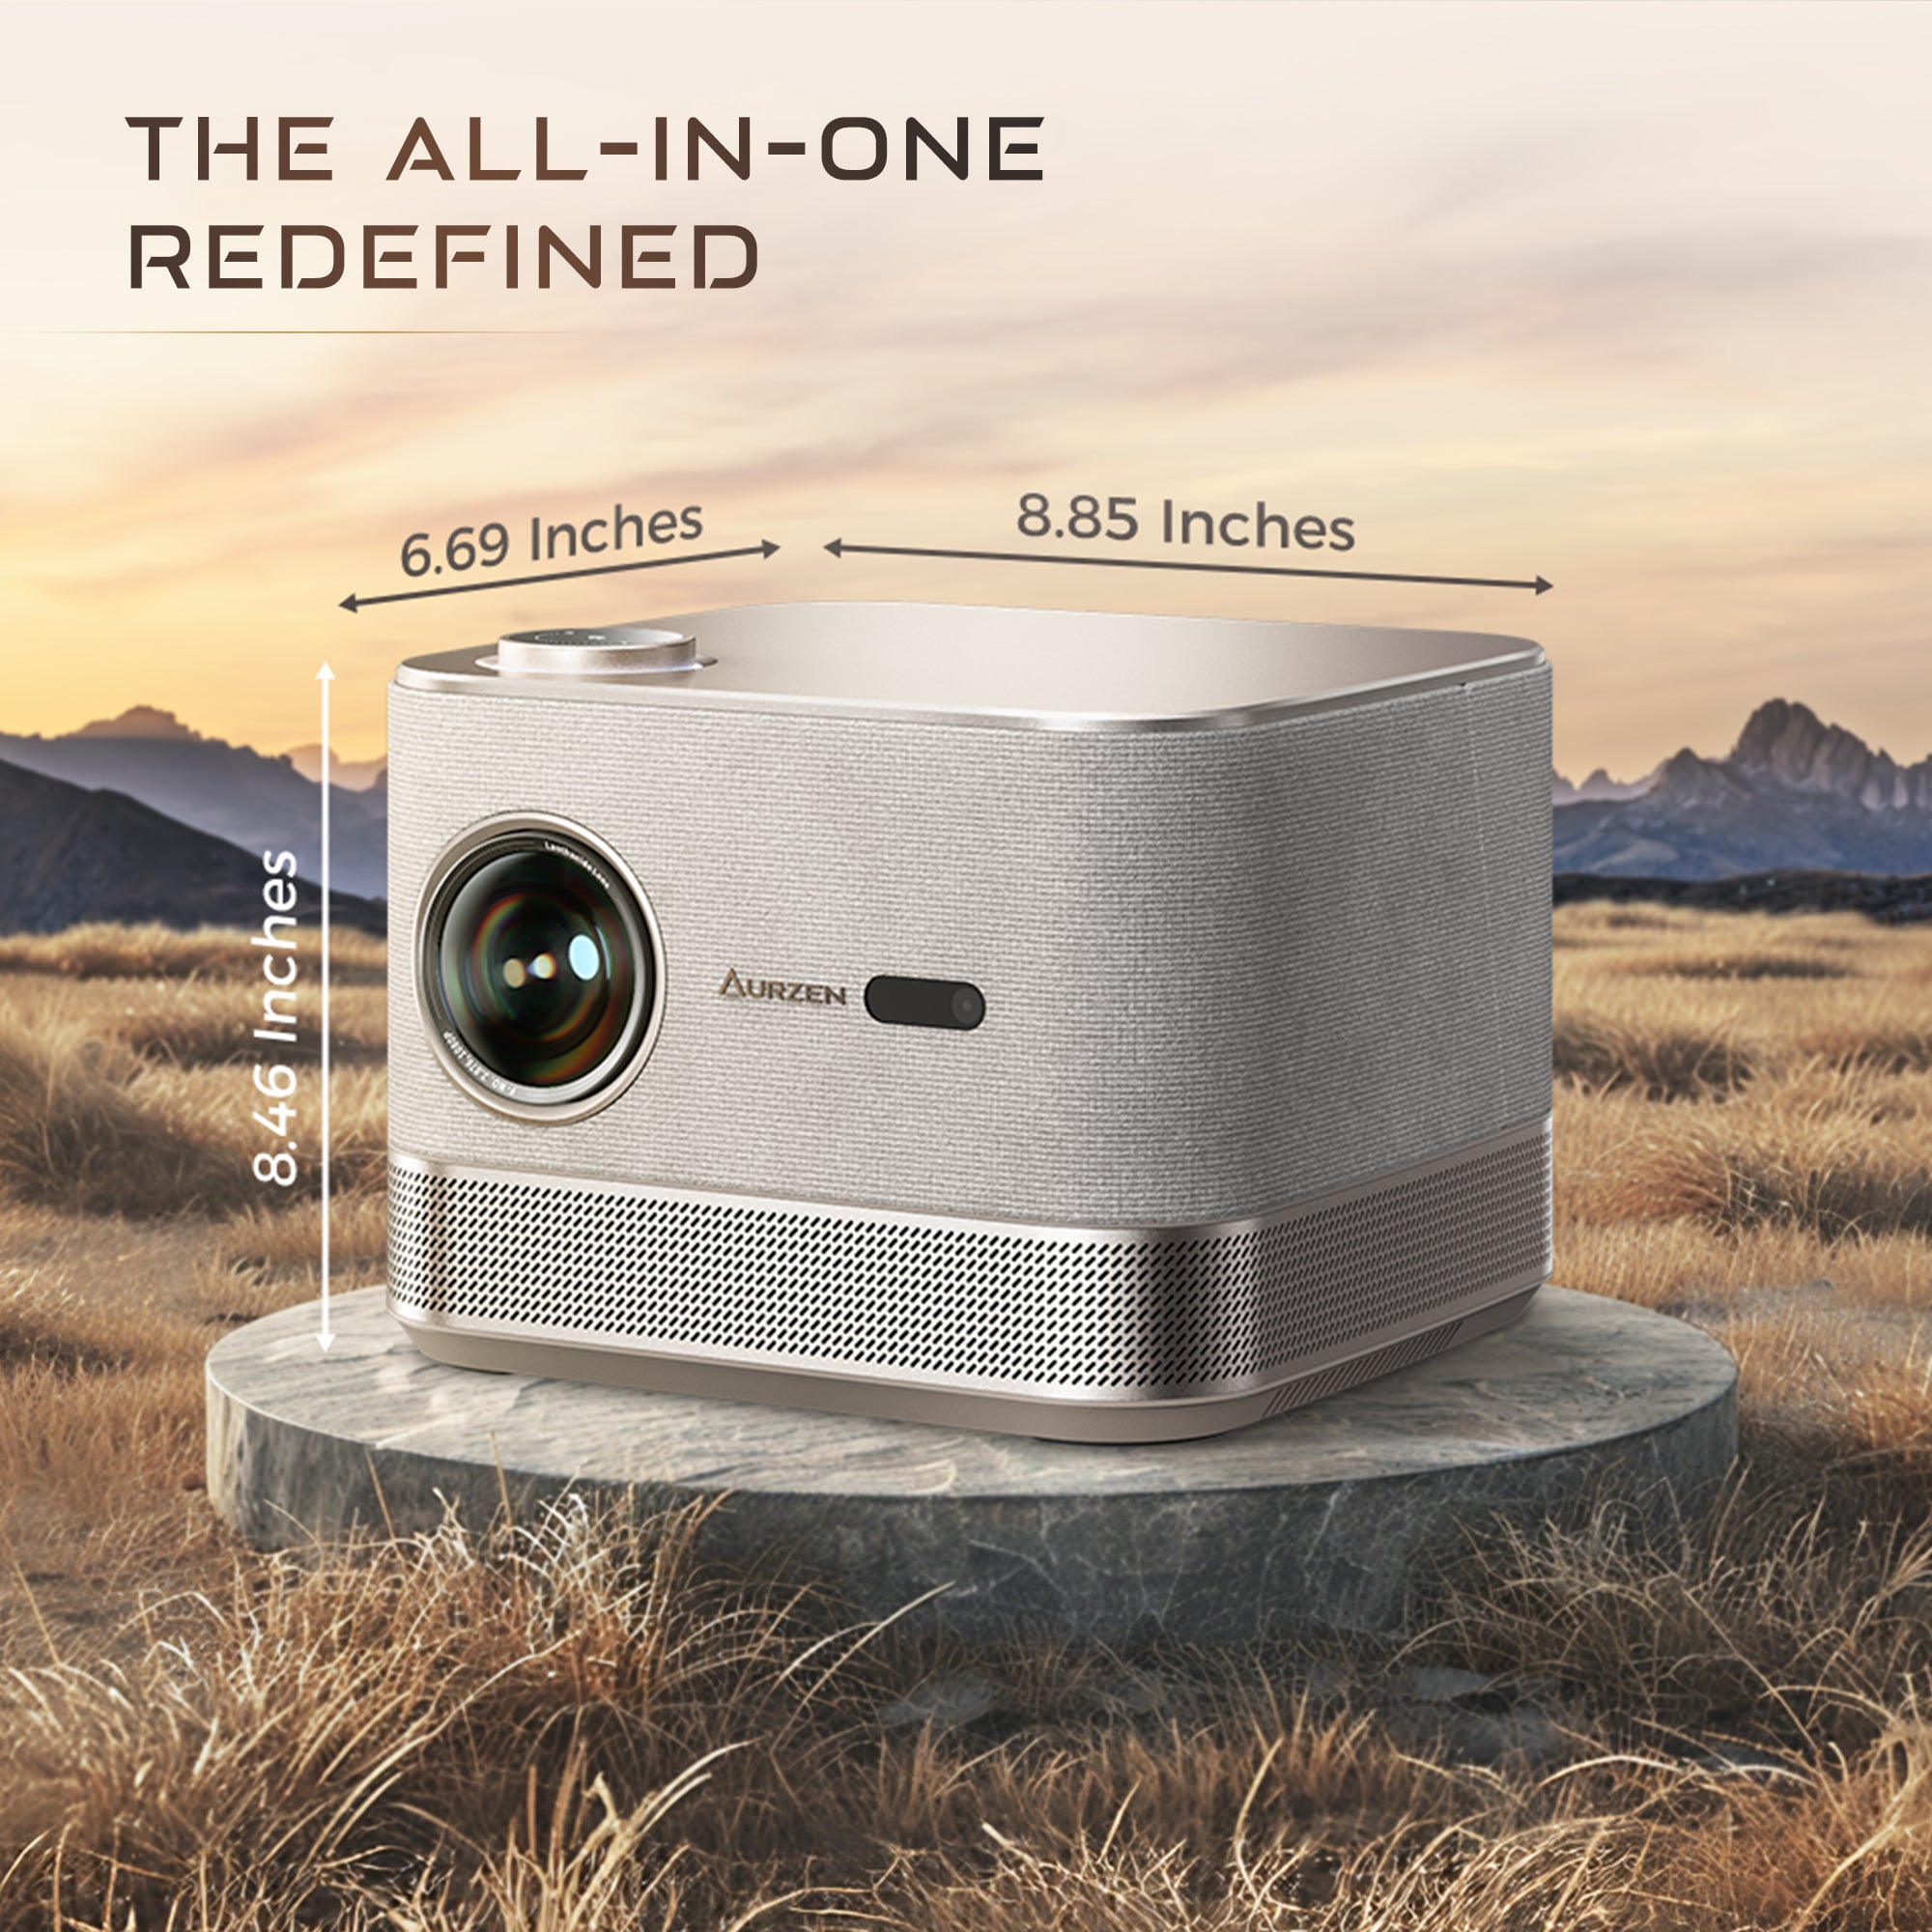 BOOM 3 Projector (Gold)